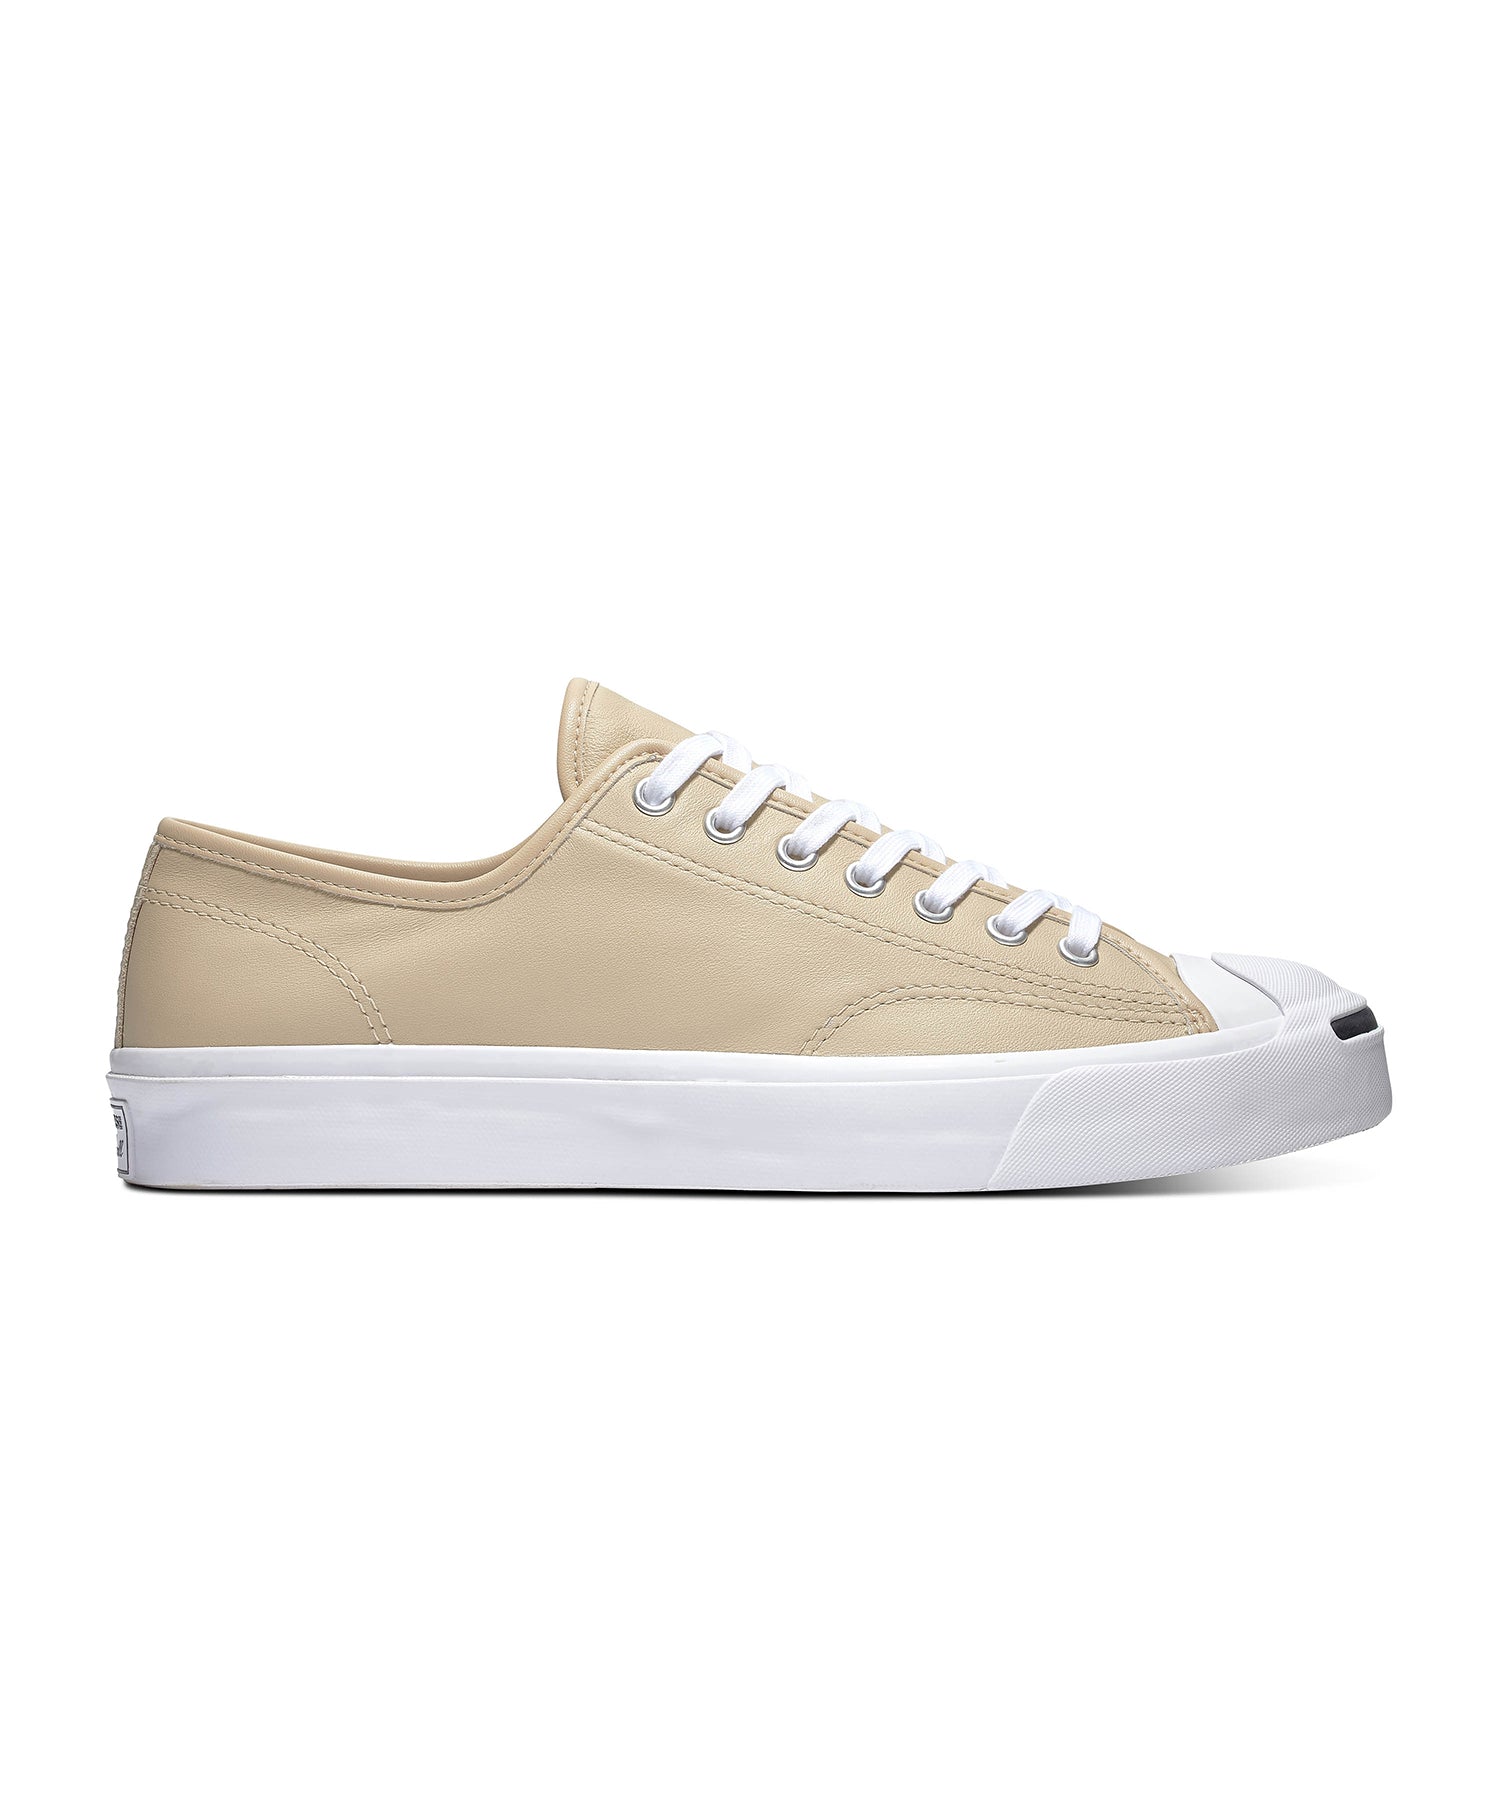 converse jack purcell desert storm leather low top